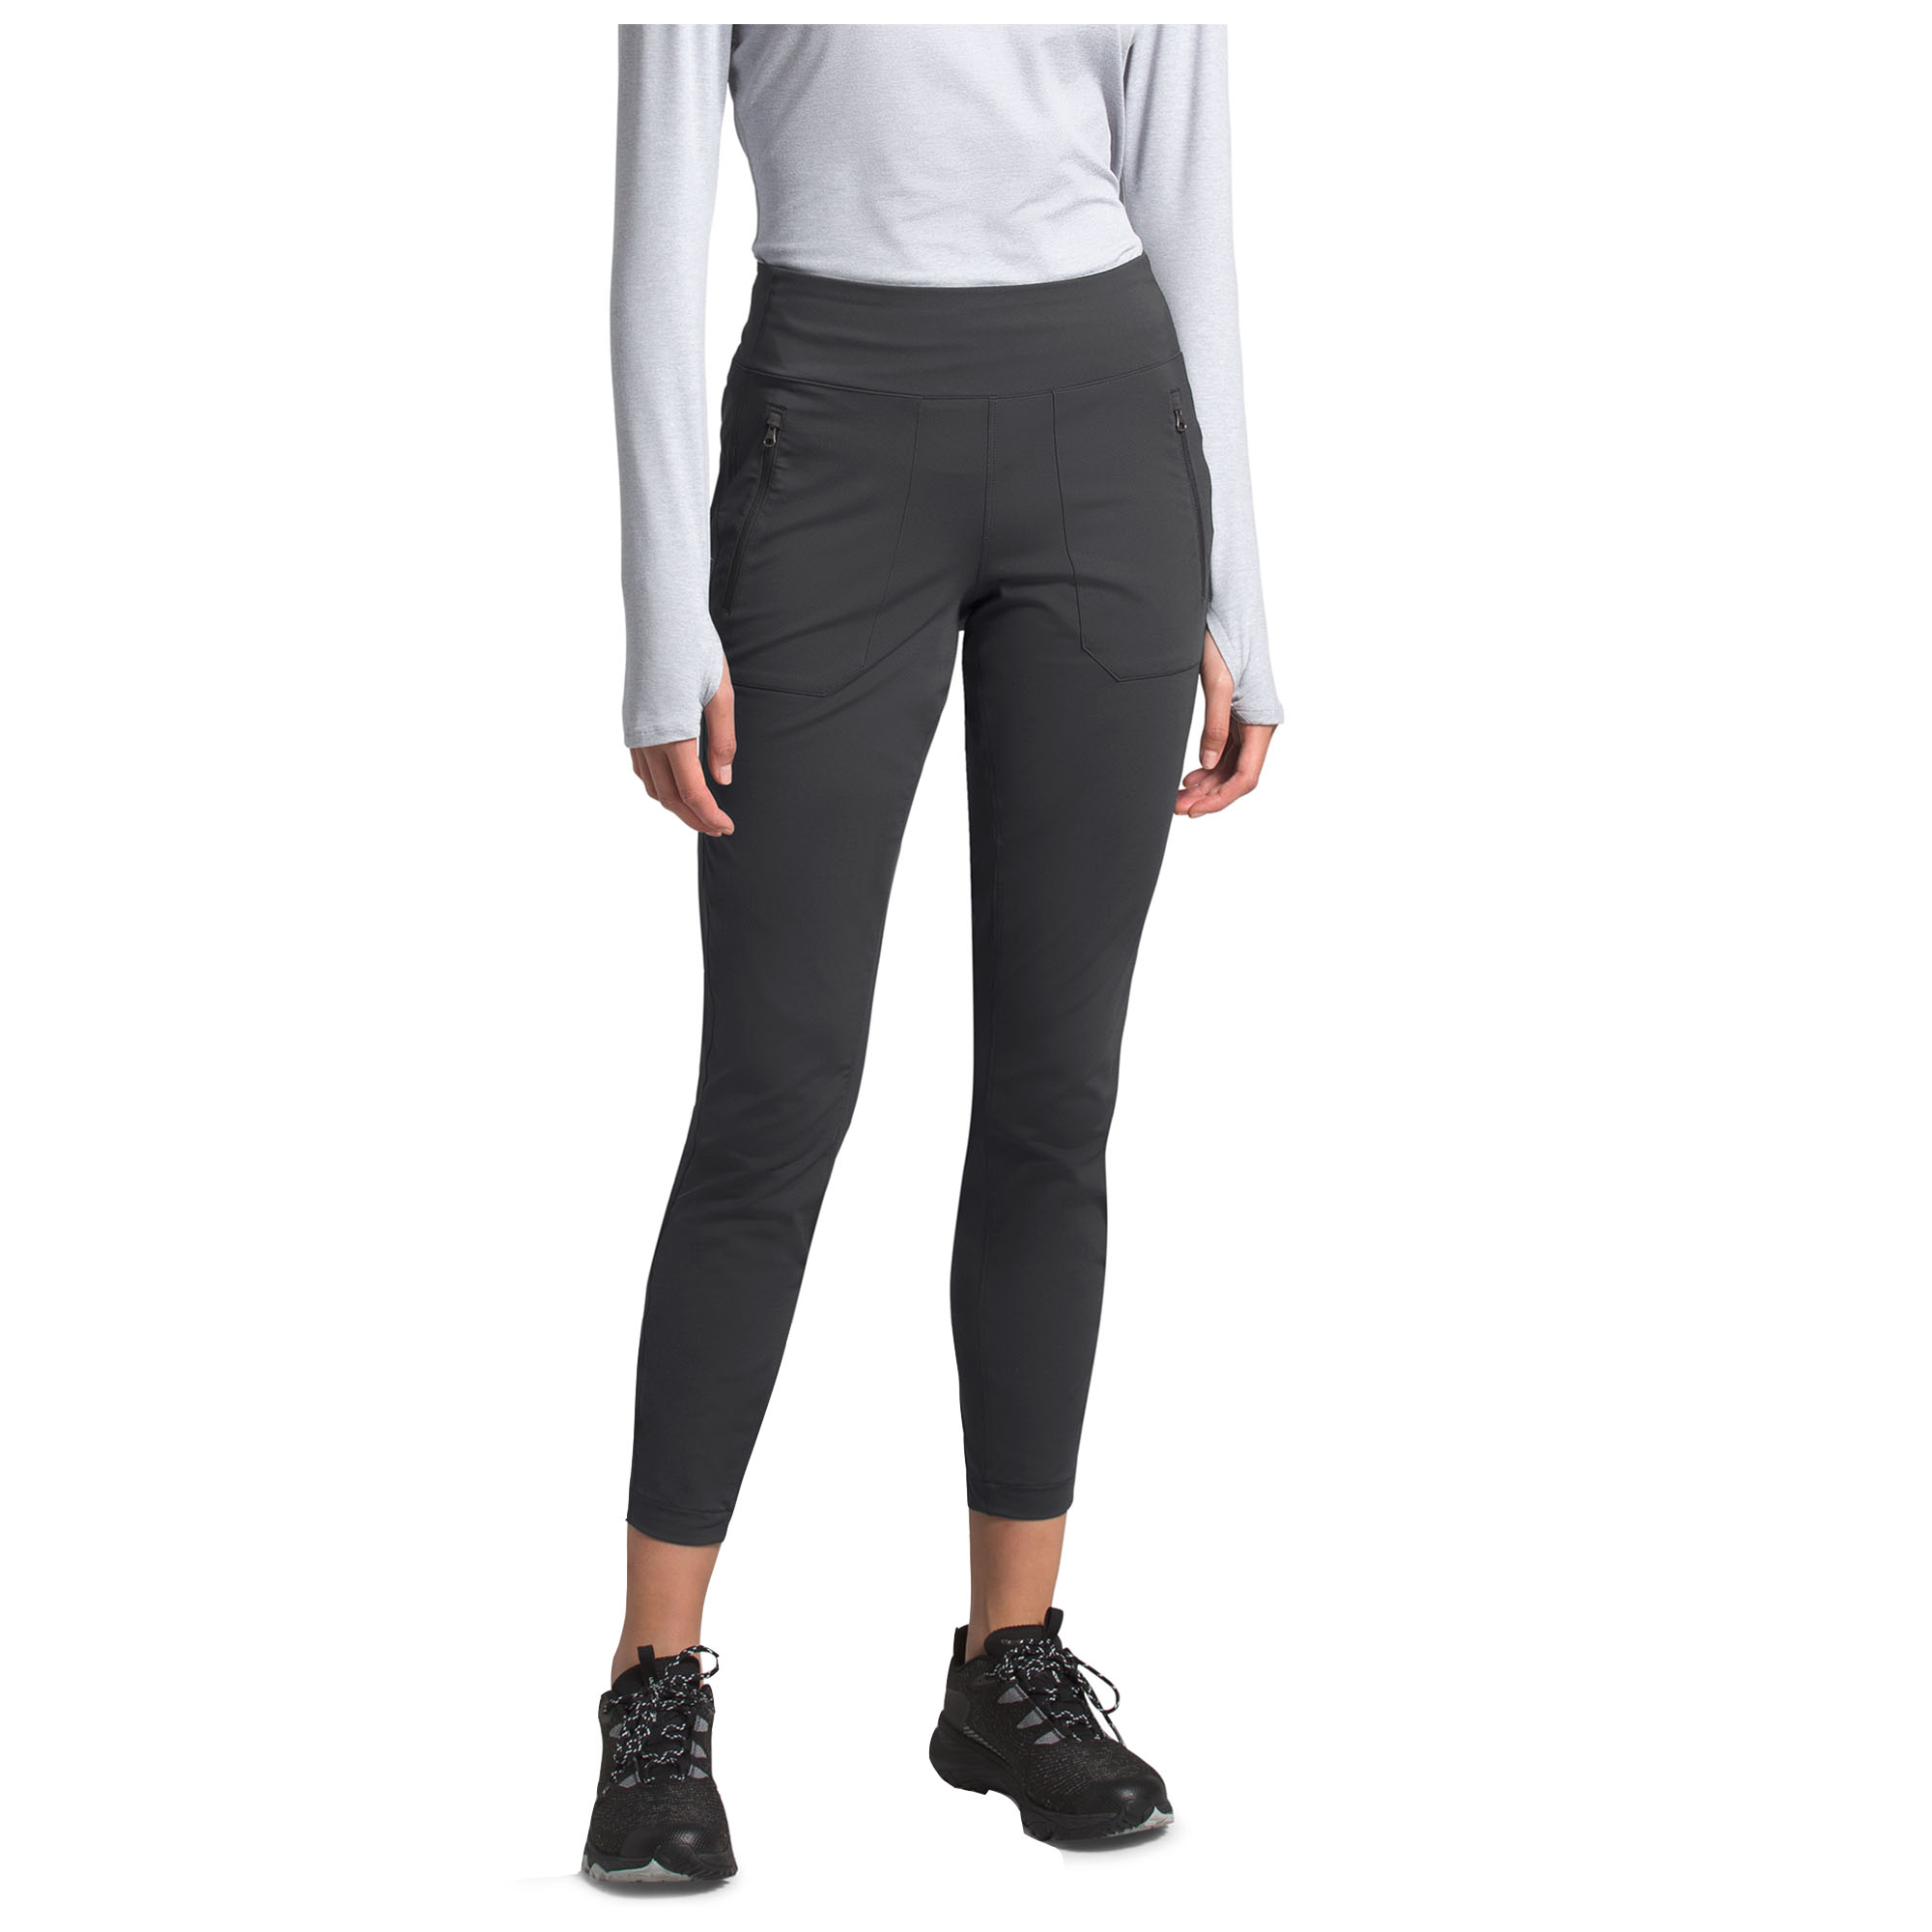 WOMEN'S PARAMOUNT HYBRID HIGH-RISE TIGHT, The North Face